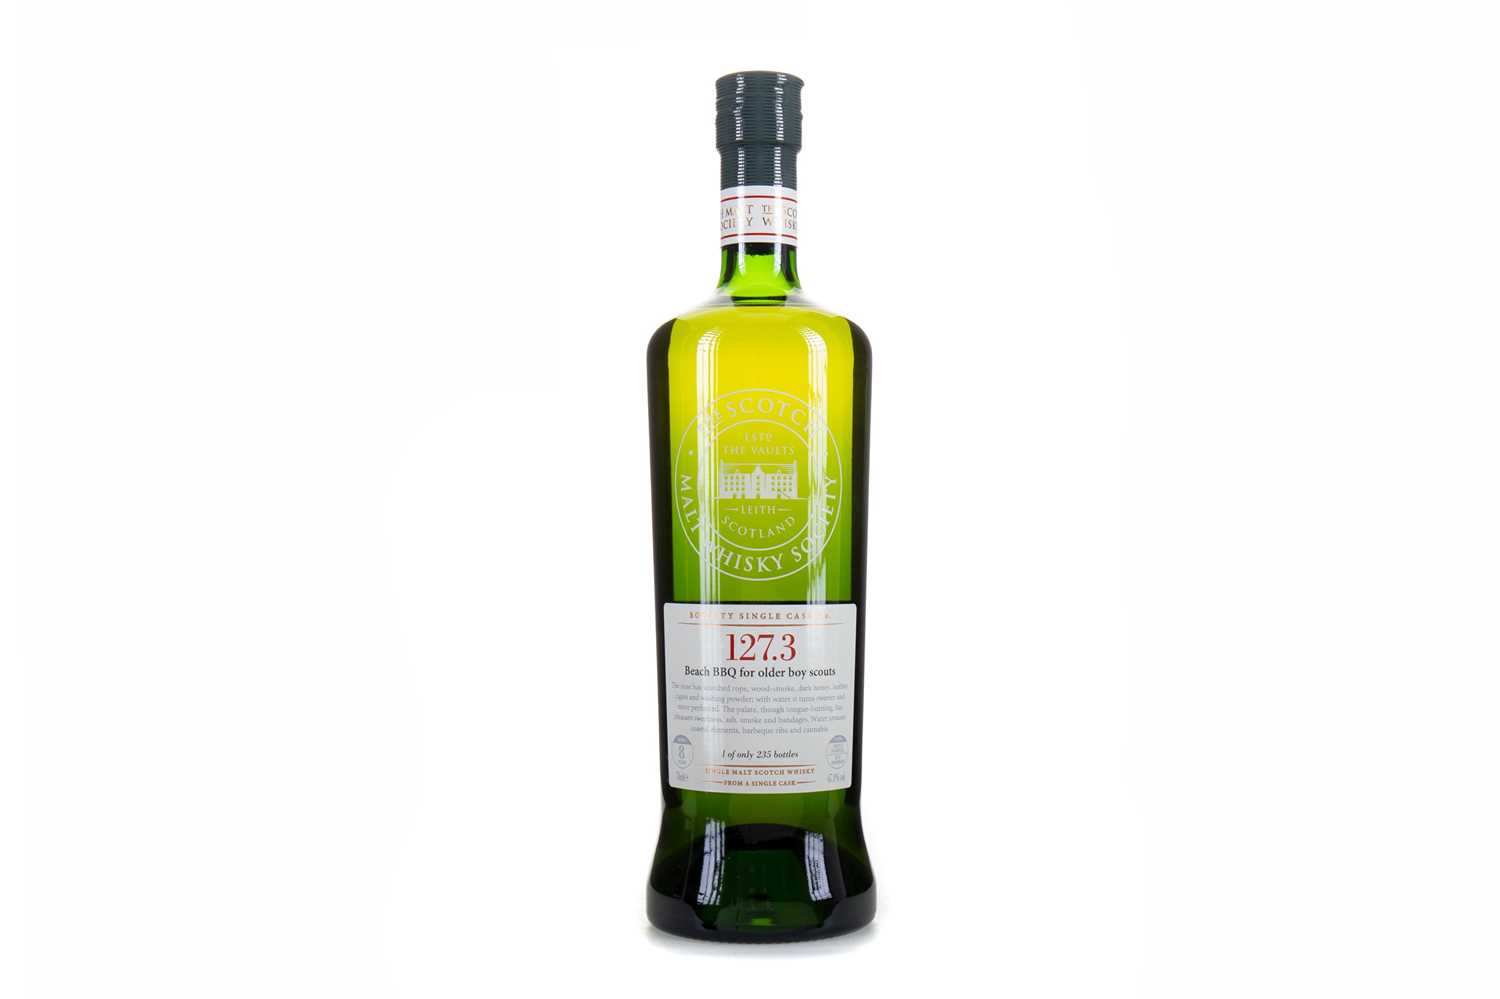 Lot 590 - SMWS 127.3 PORT CHARLOTTE 8 YEAR OLD